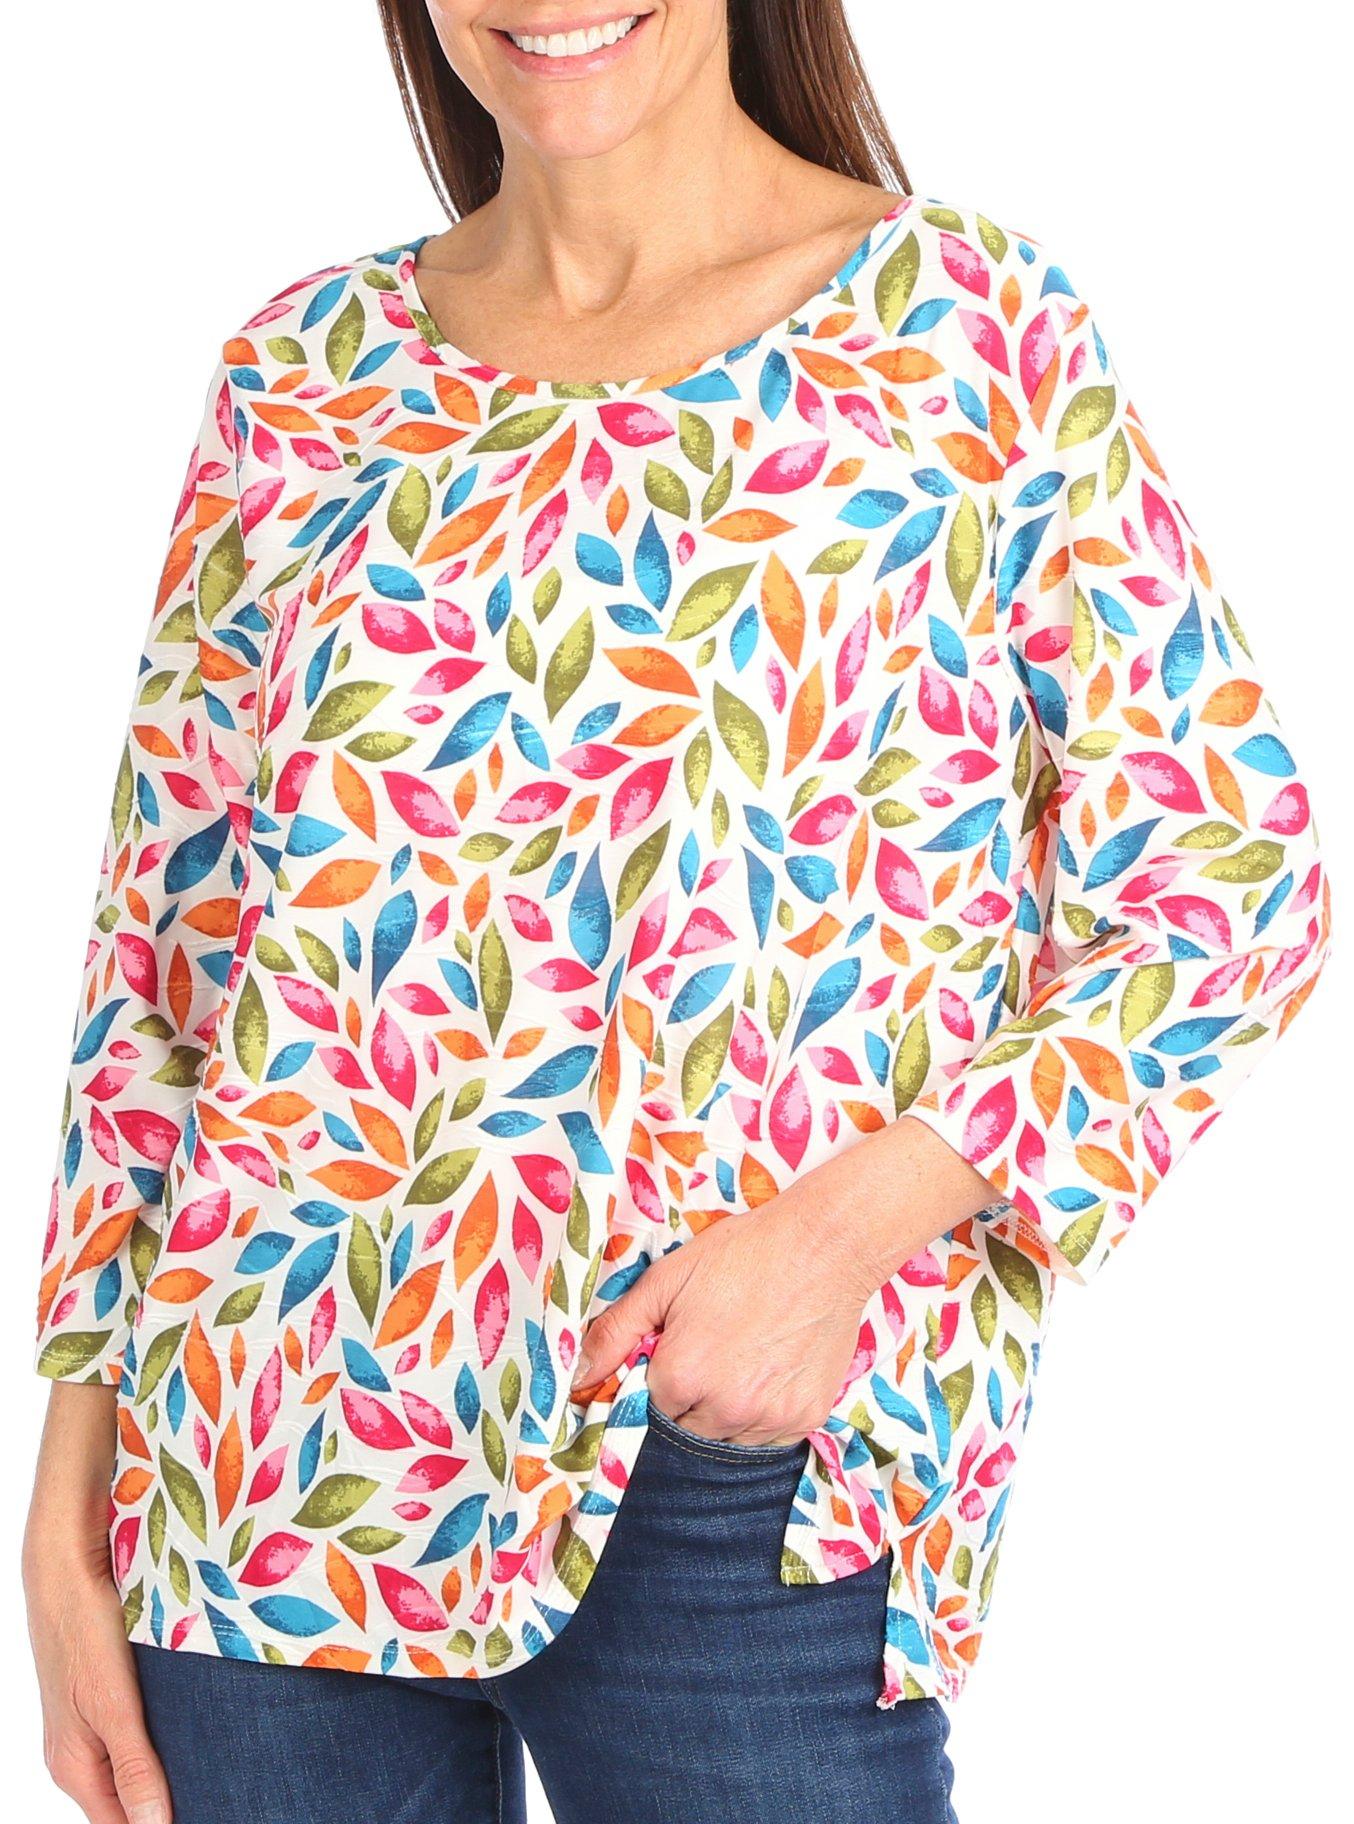 Womens Colorful 3/4 Sleeve Top